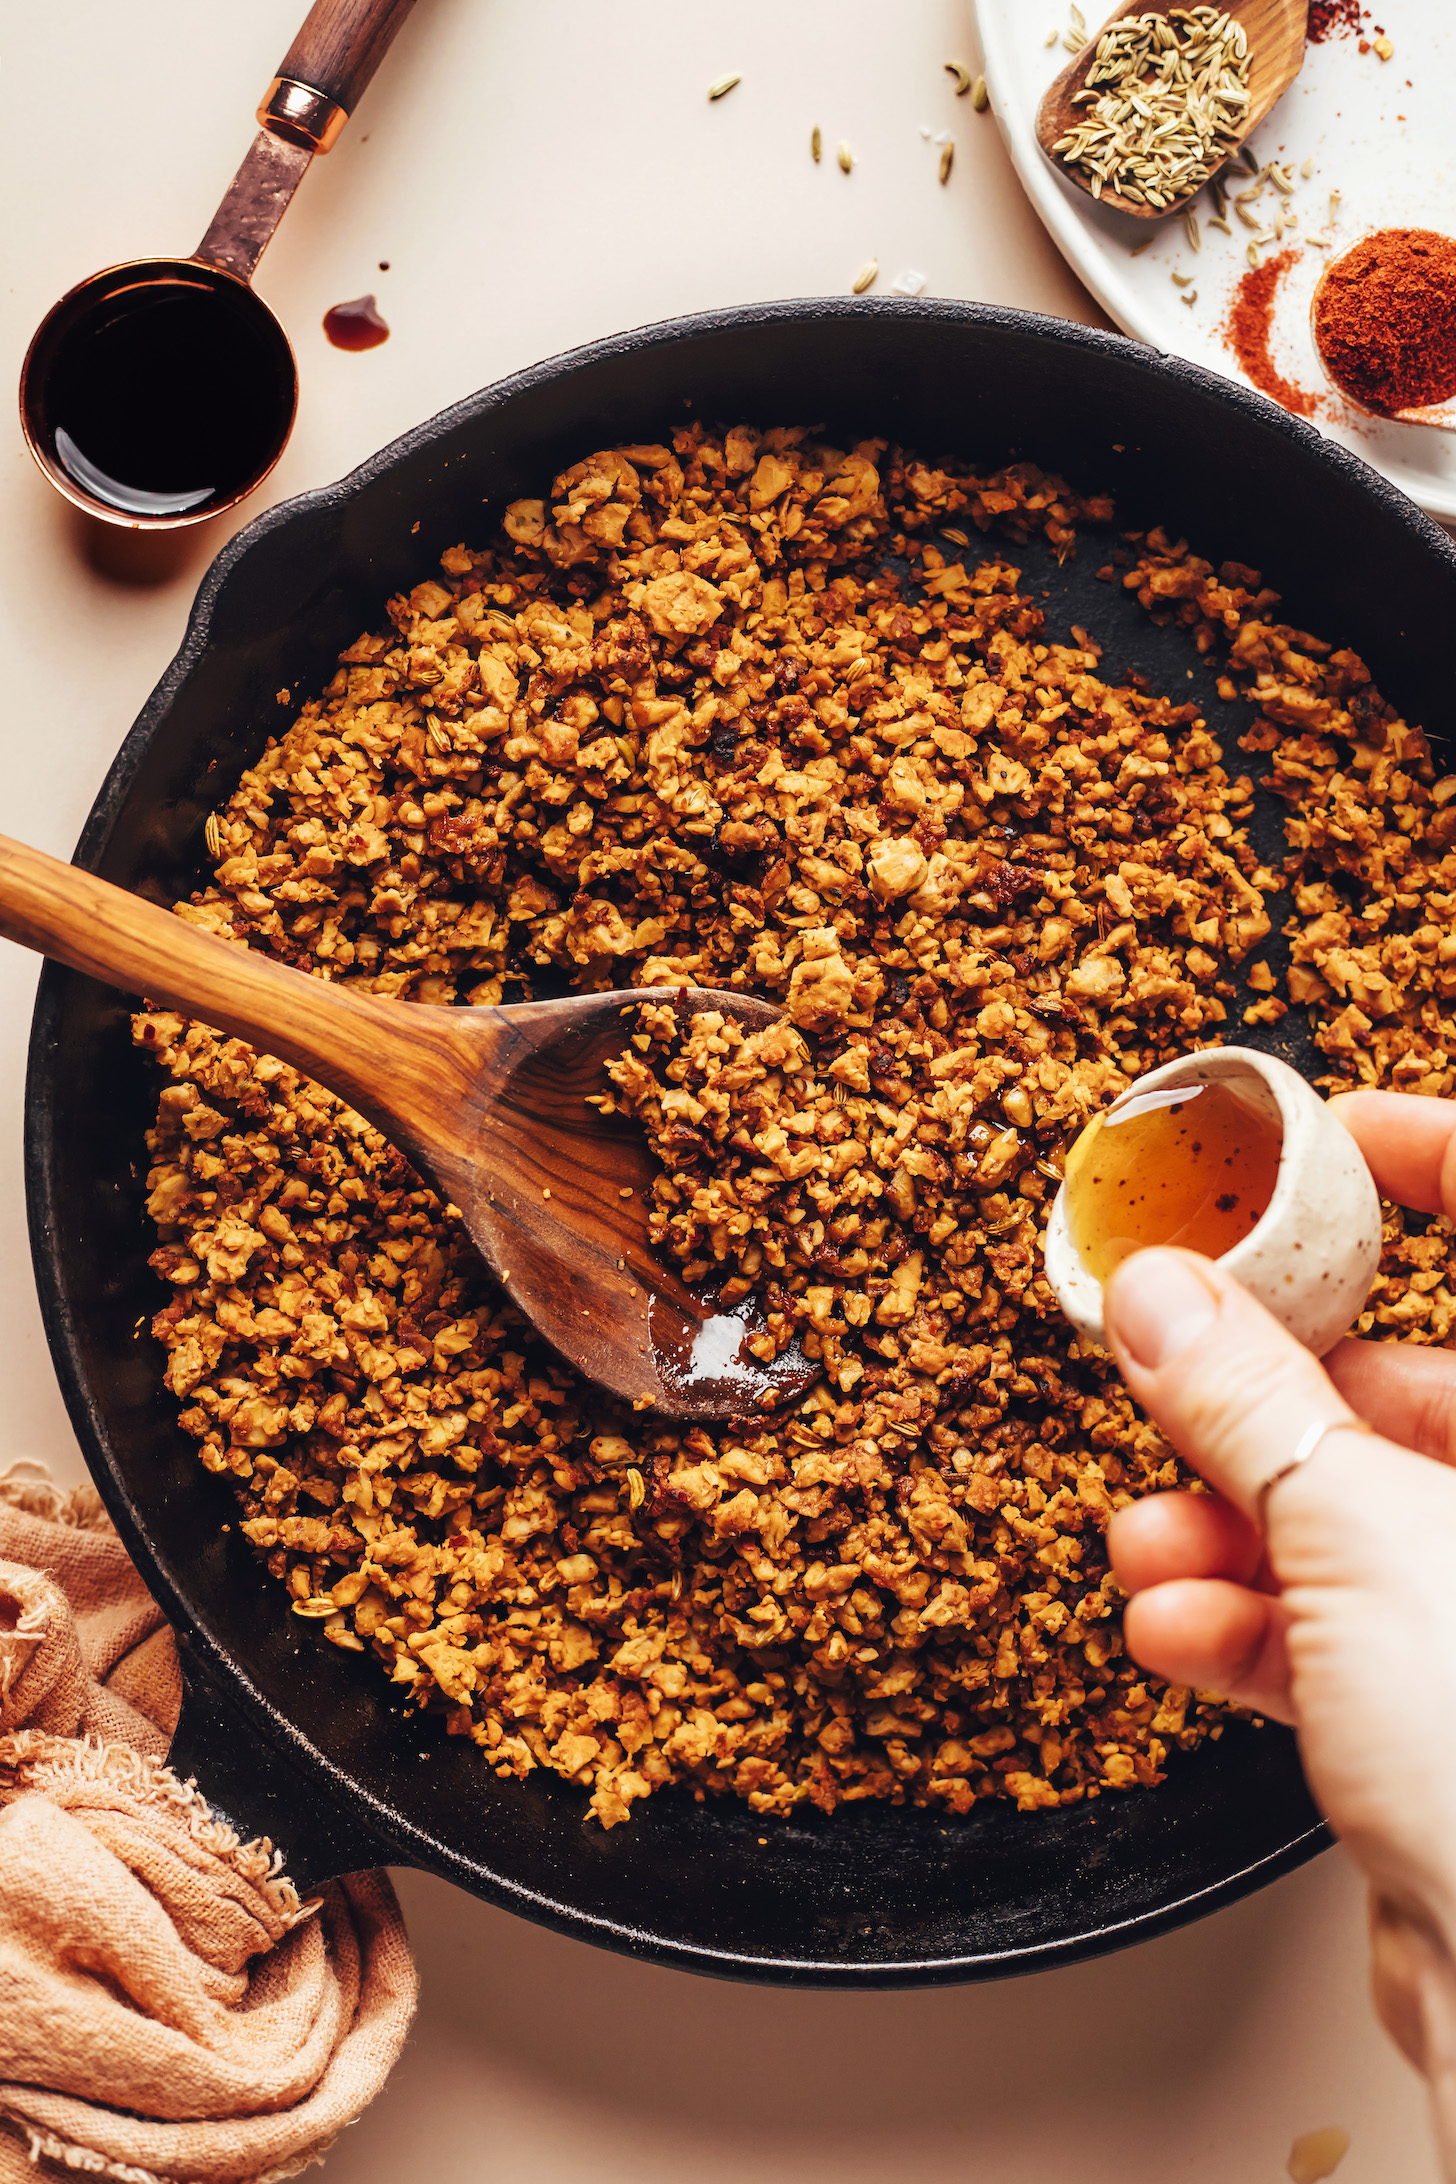 Pour maple syrup into a skillet of seasoned tempeh